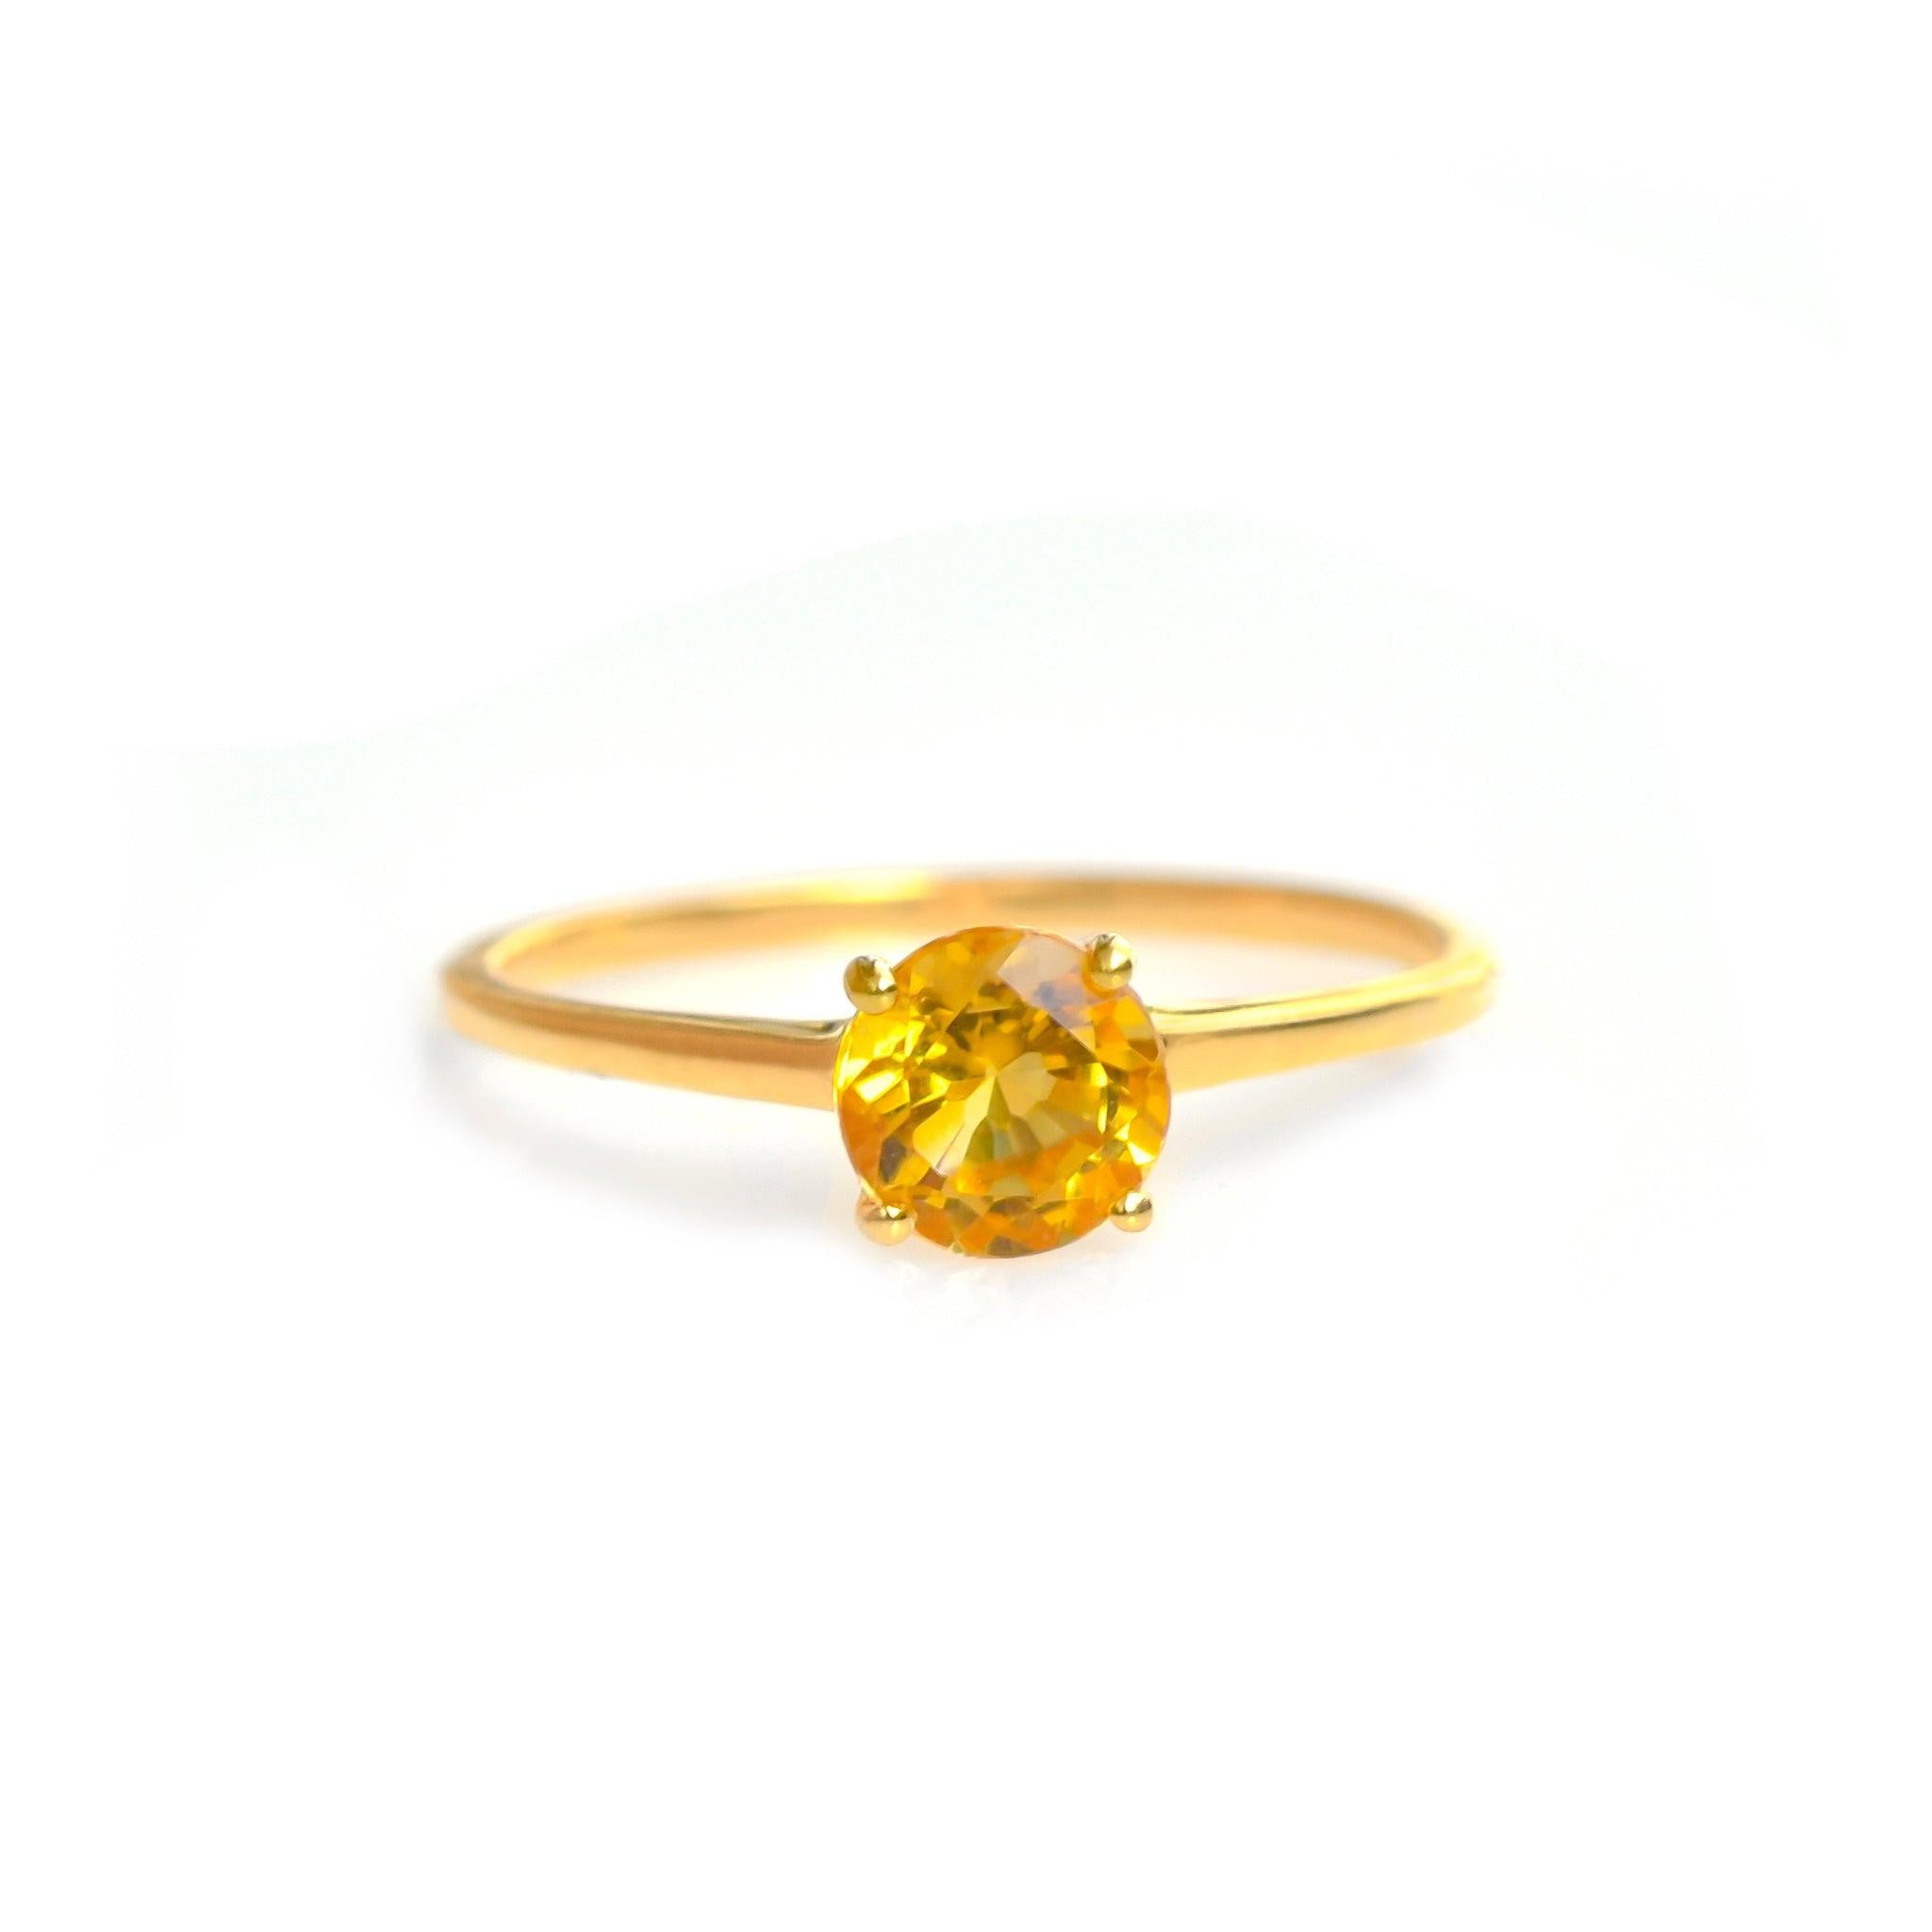 0.75 Ct Citrine Solid 10k Yellow Gold Solitaire Ring Jewelry - YoTreasure